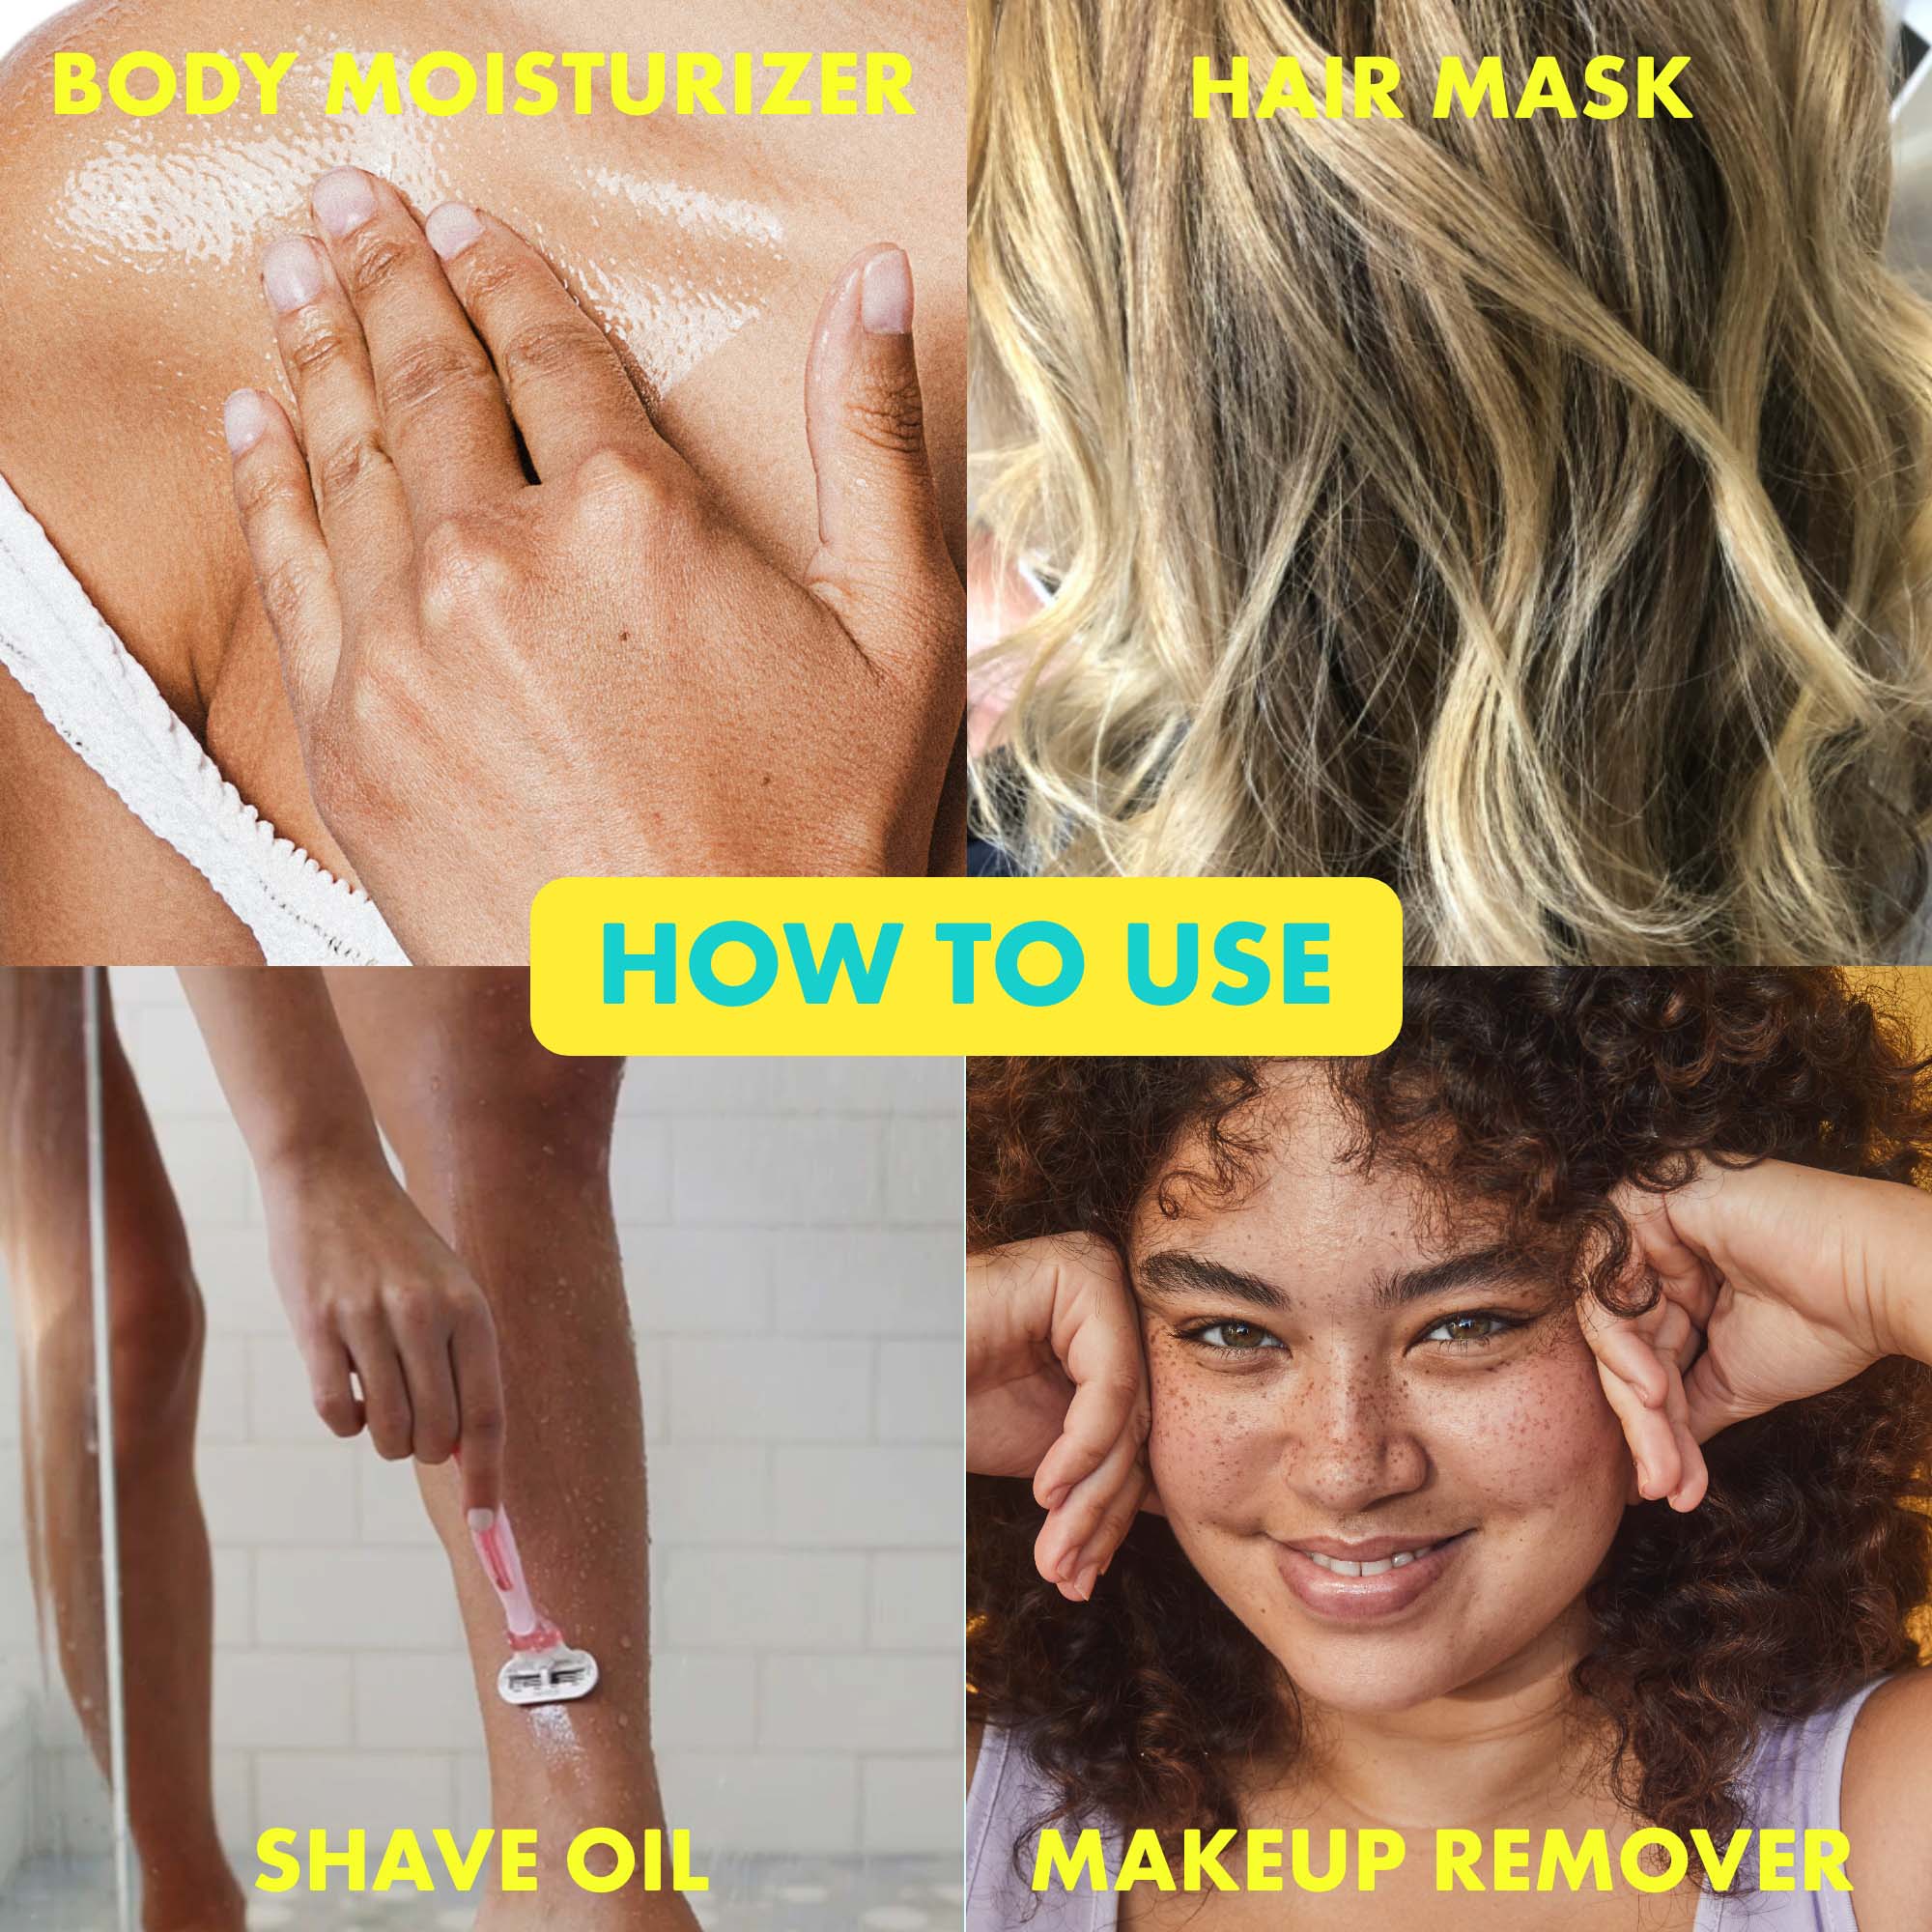 How to Use, body moisturiser, hair mask, shave oil, makeup remover